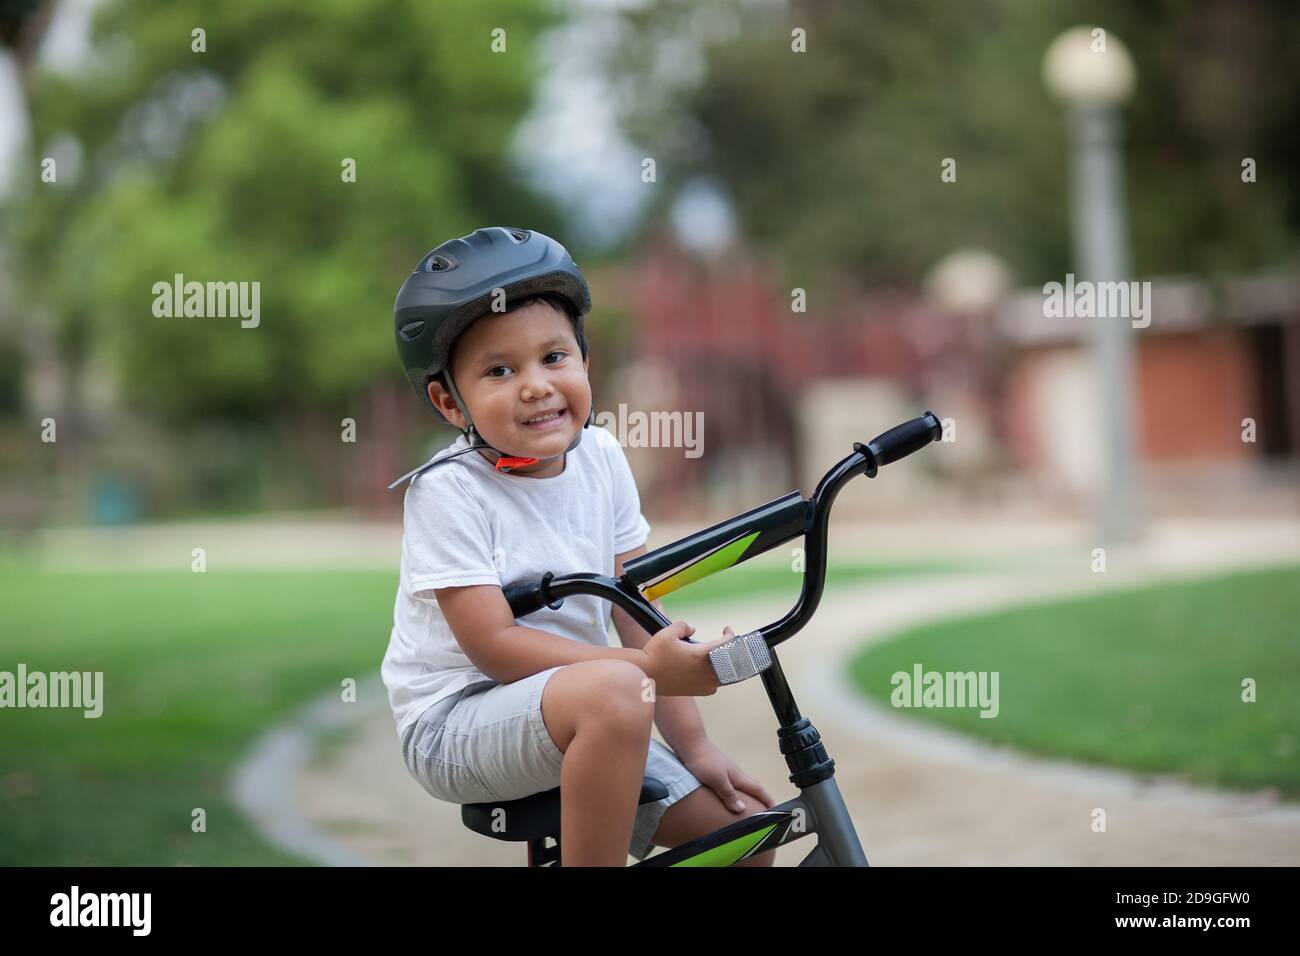 A healthy young boy sitting on his bike on a park trail who is wearing a safety helmet, t-shirt and shorts. Stock Photo